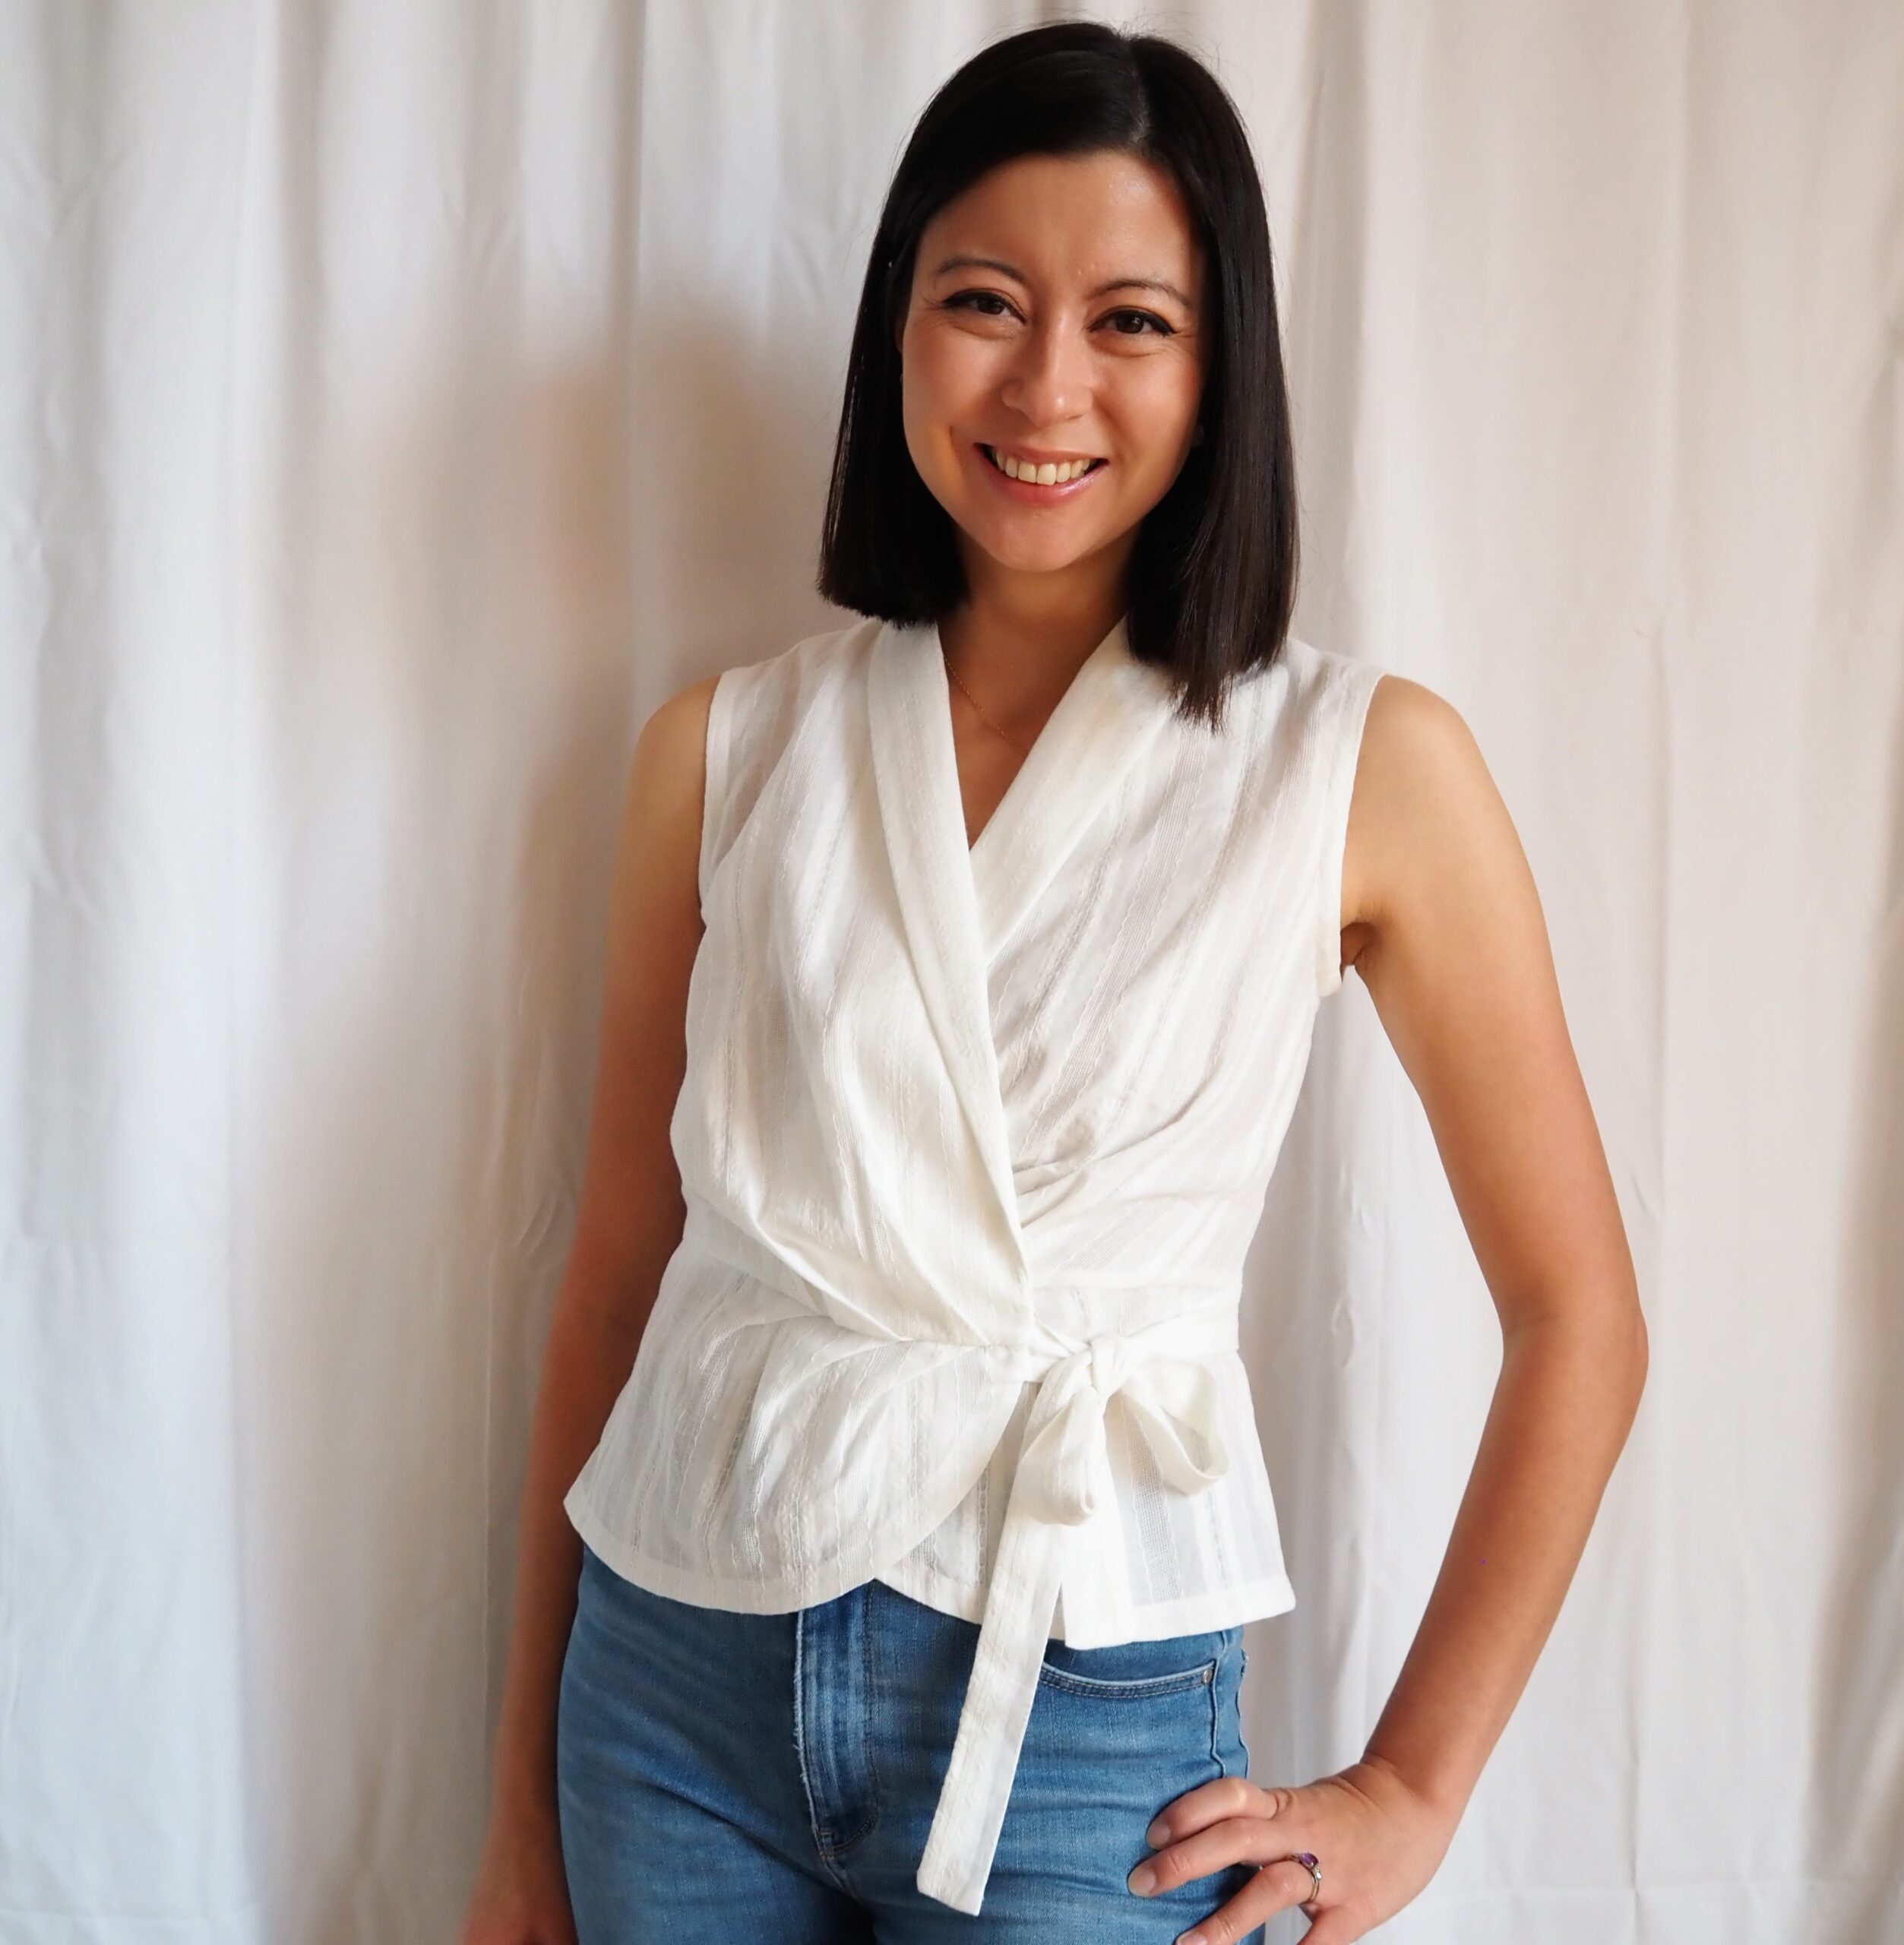 A half white, half Asian woman stands smiling in front of a white curtain. She is wearing a white sleeveless wrap blouse and blue jeans. 